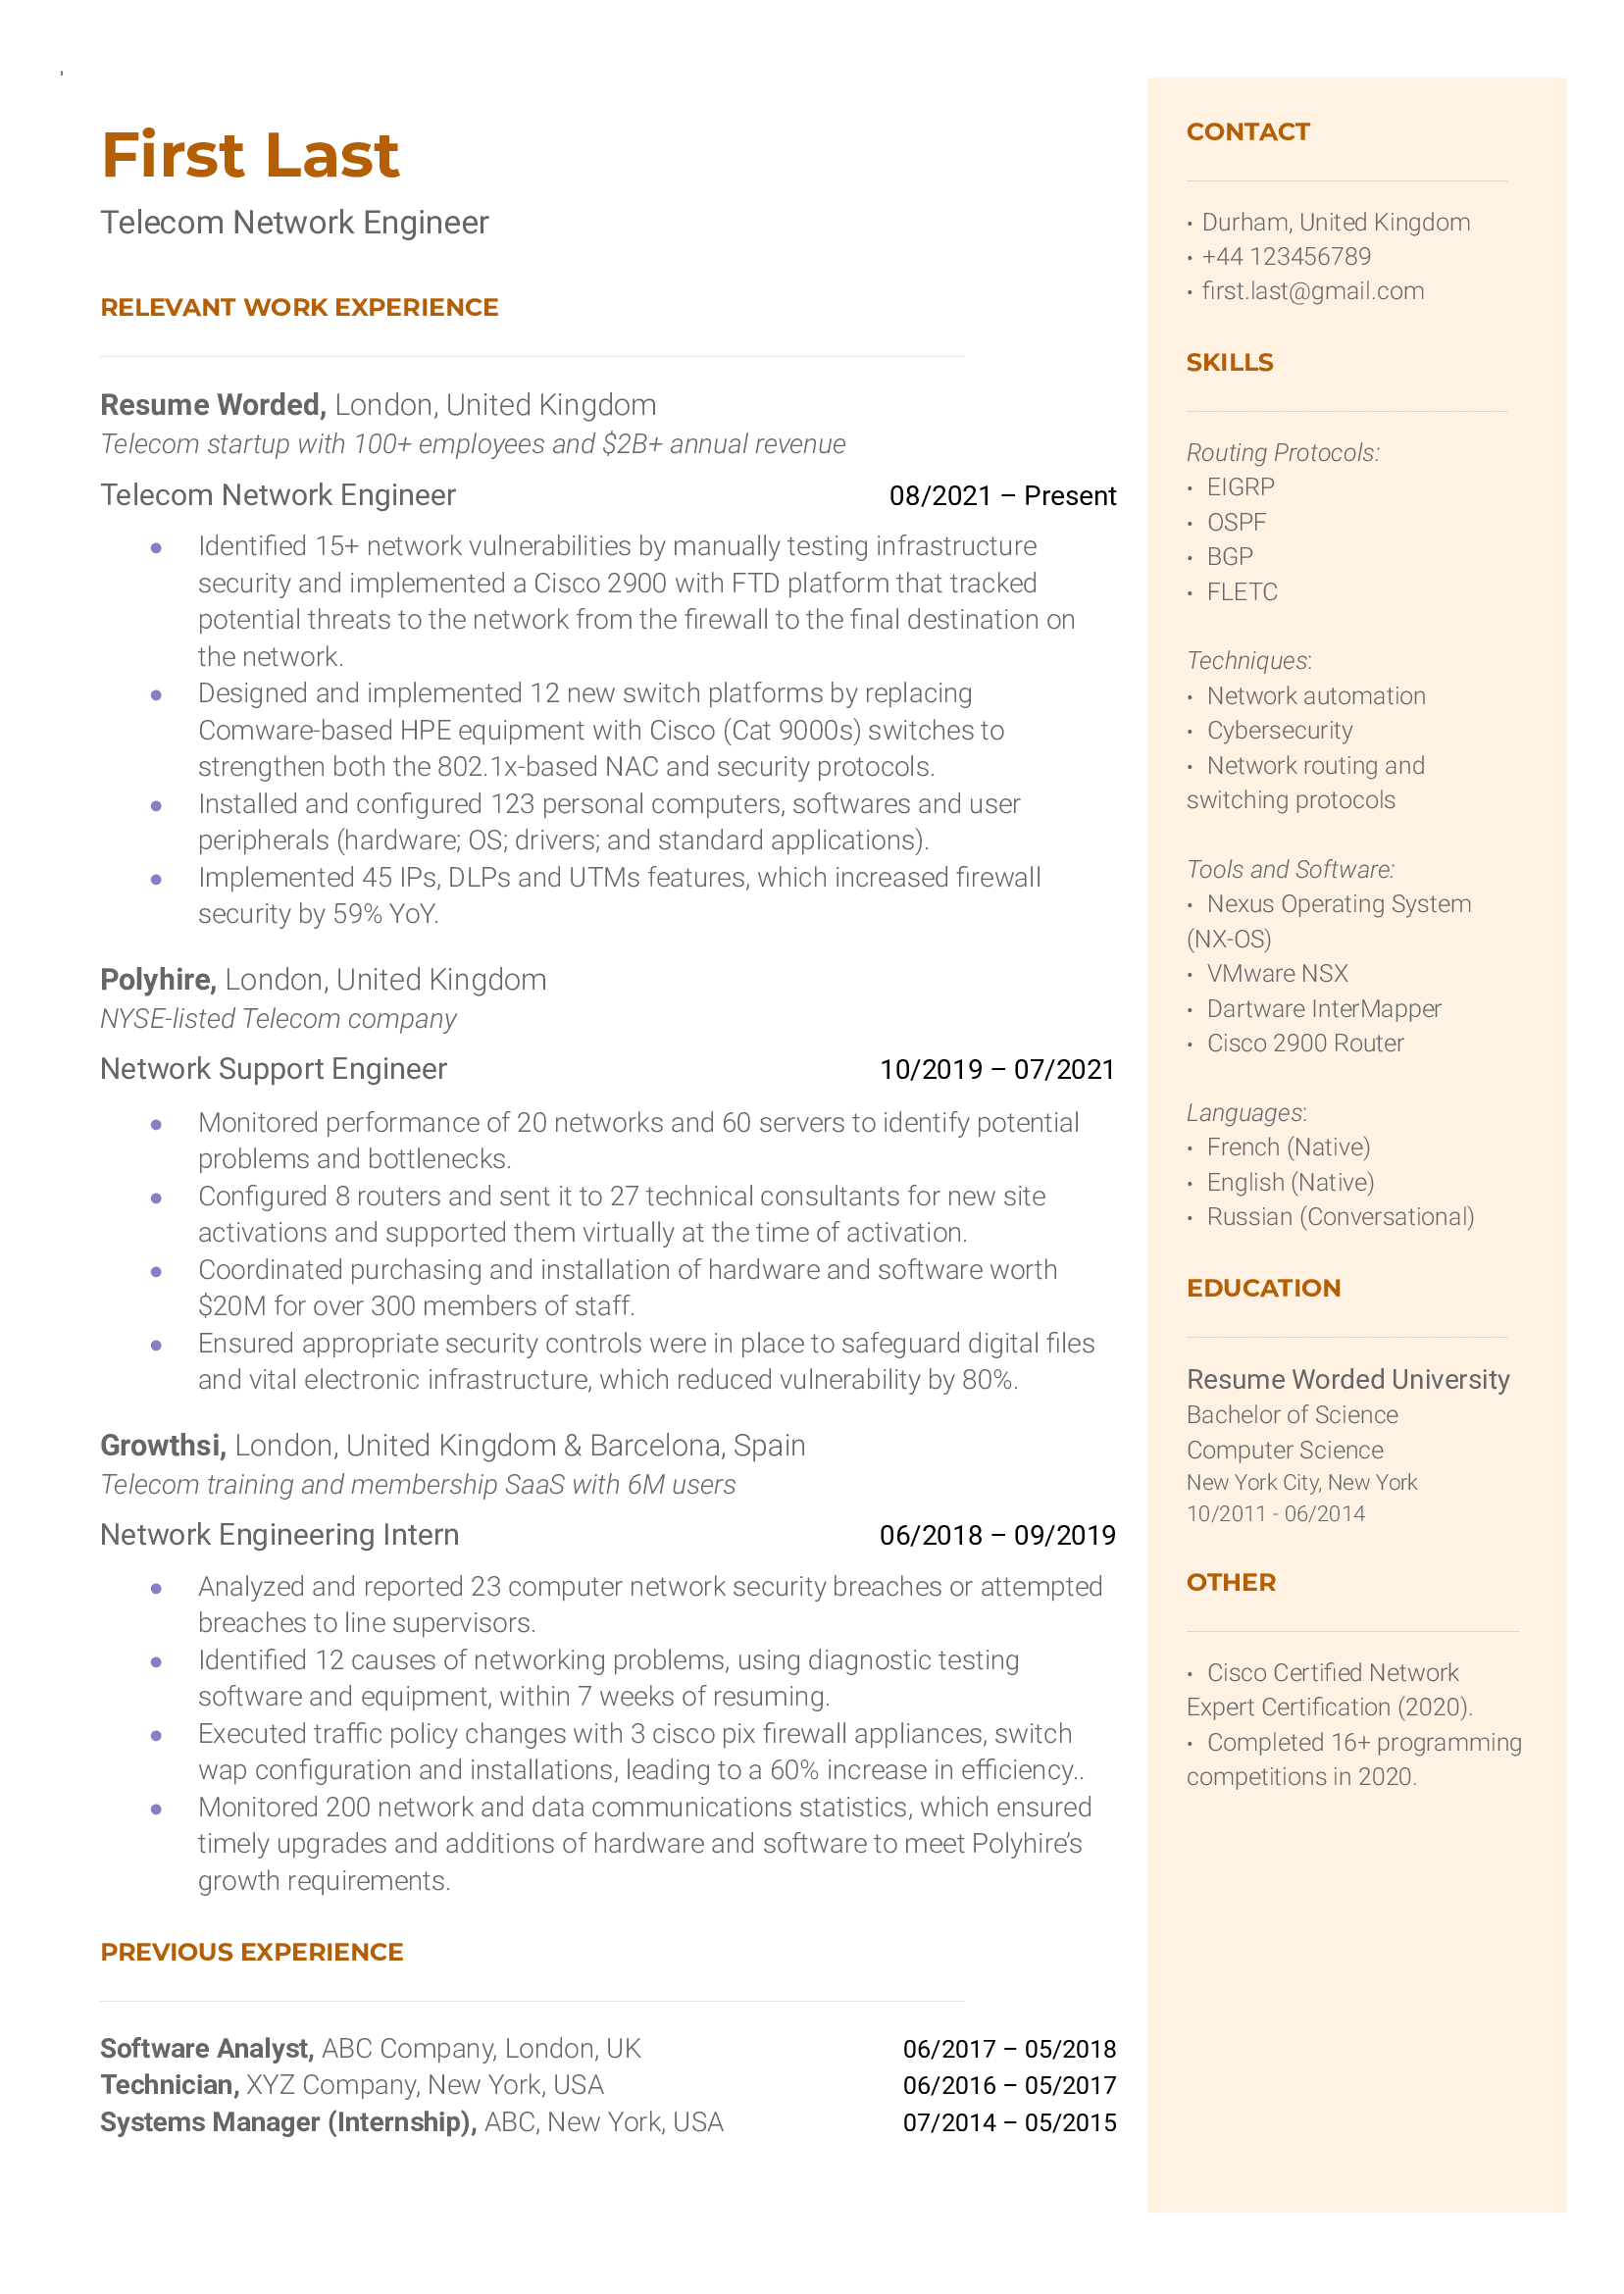 A resume for a telecom network engineer with past experience in network support and a bachelor's degree in computer science. 